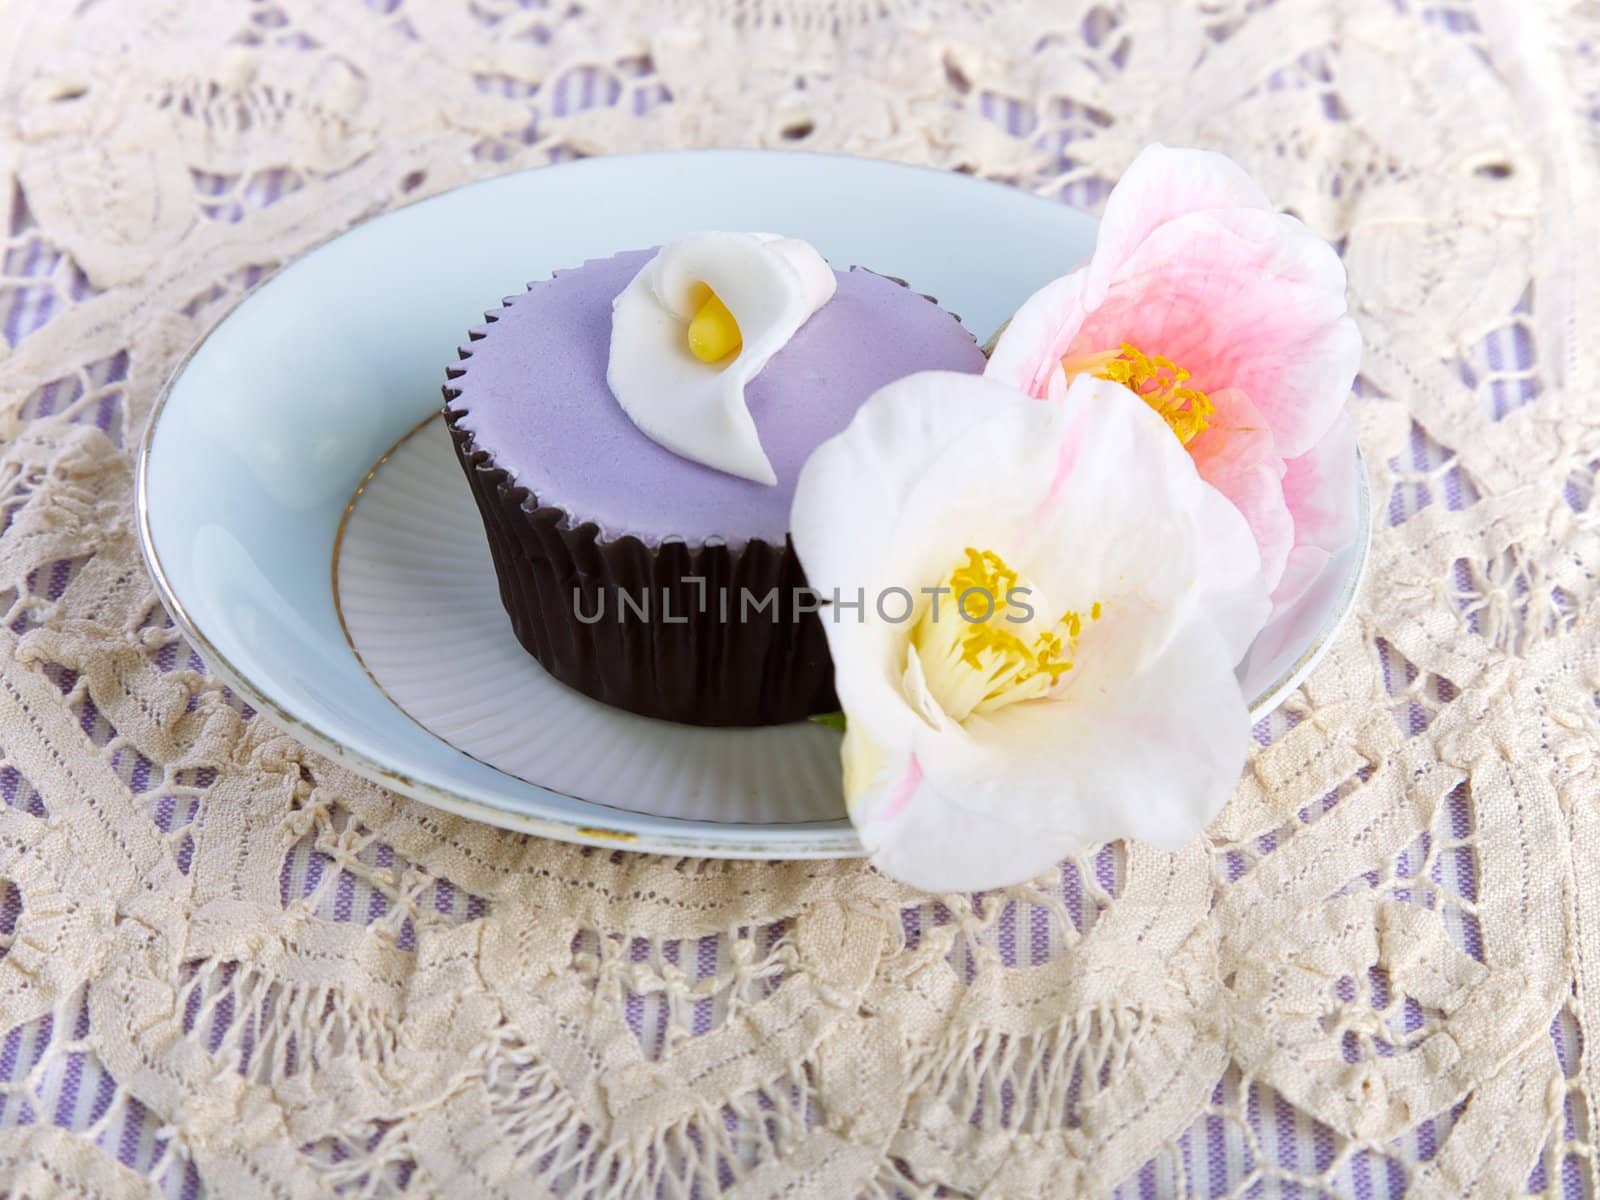 Cupcake and flowers displayed on a plate